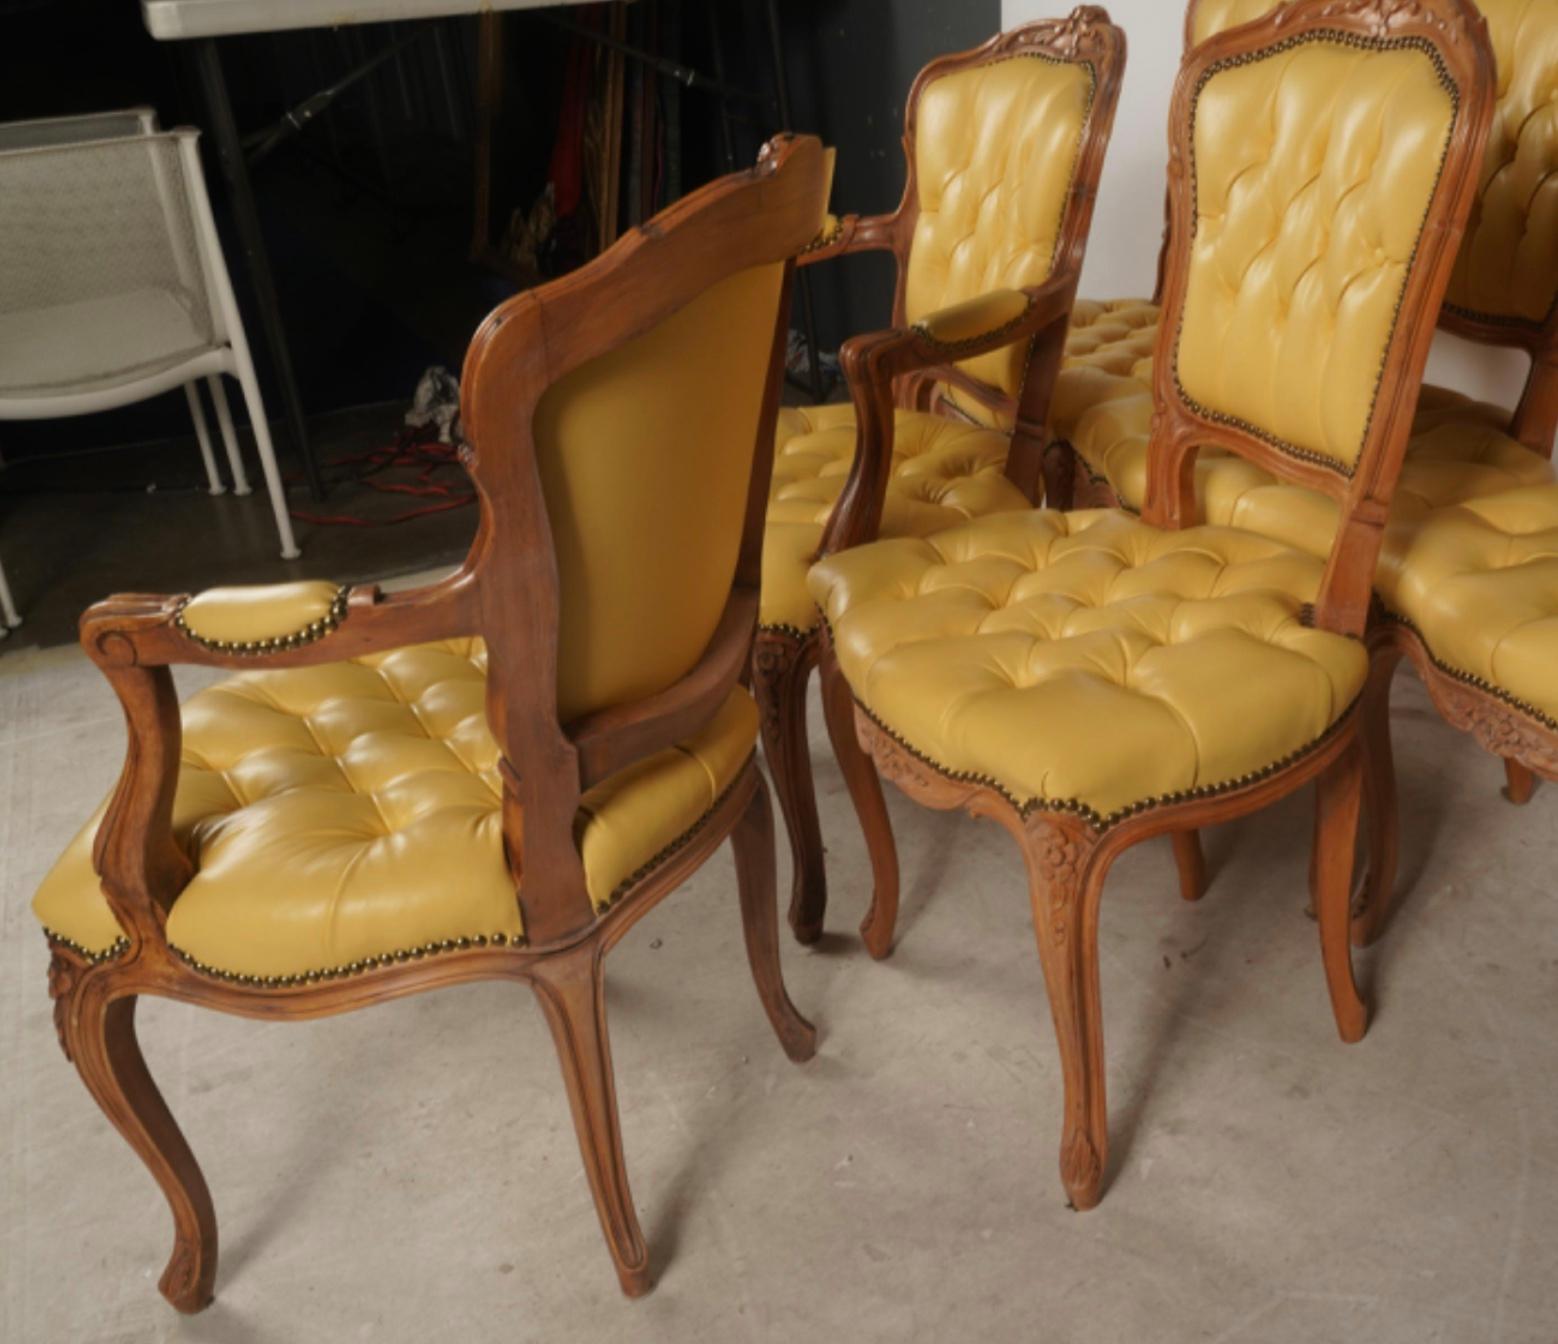 20th Century Set of 6 French Provincial Style Tufted Yellow Leather Arm Chair Fauteuils For Sale